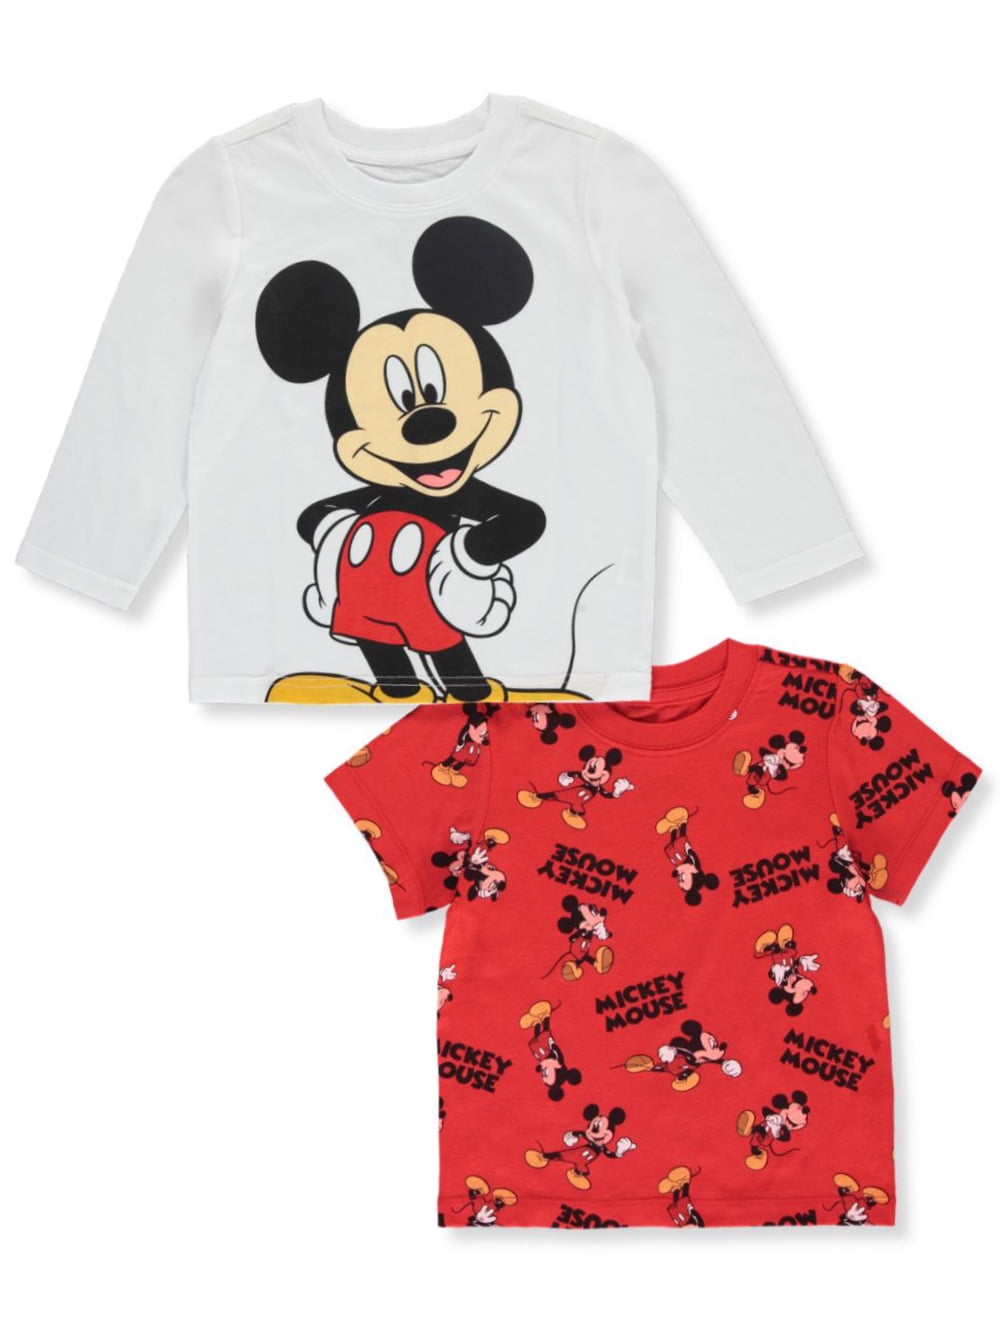 Boys Long Sleeved Tops 2 Pack Official Disney Mickey Mouse 2 3 4 5 & 6 Years 